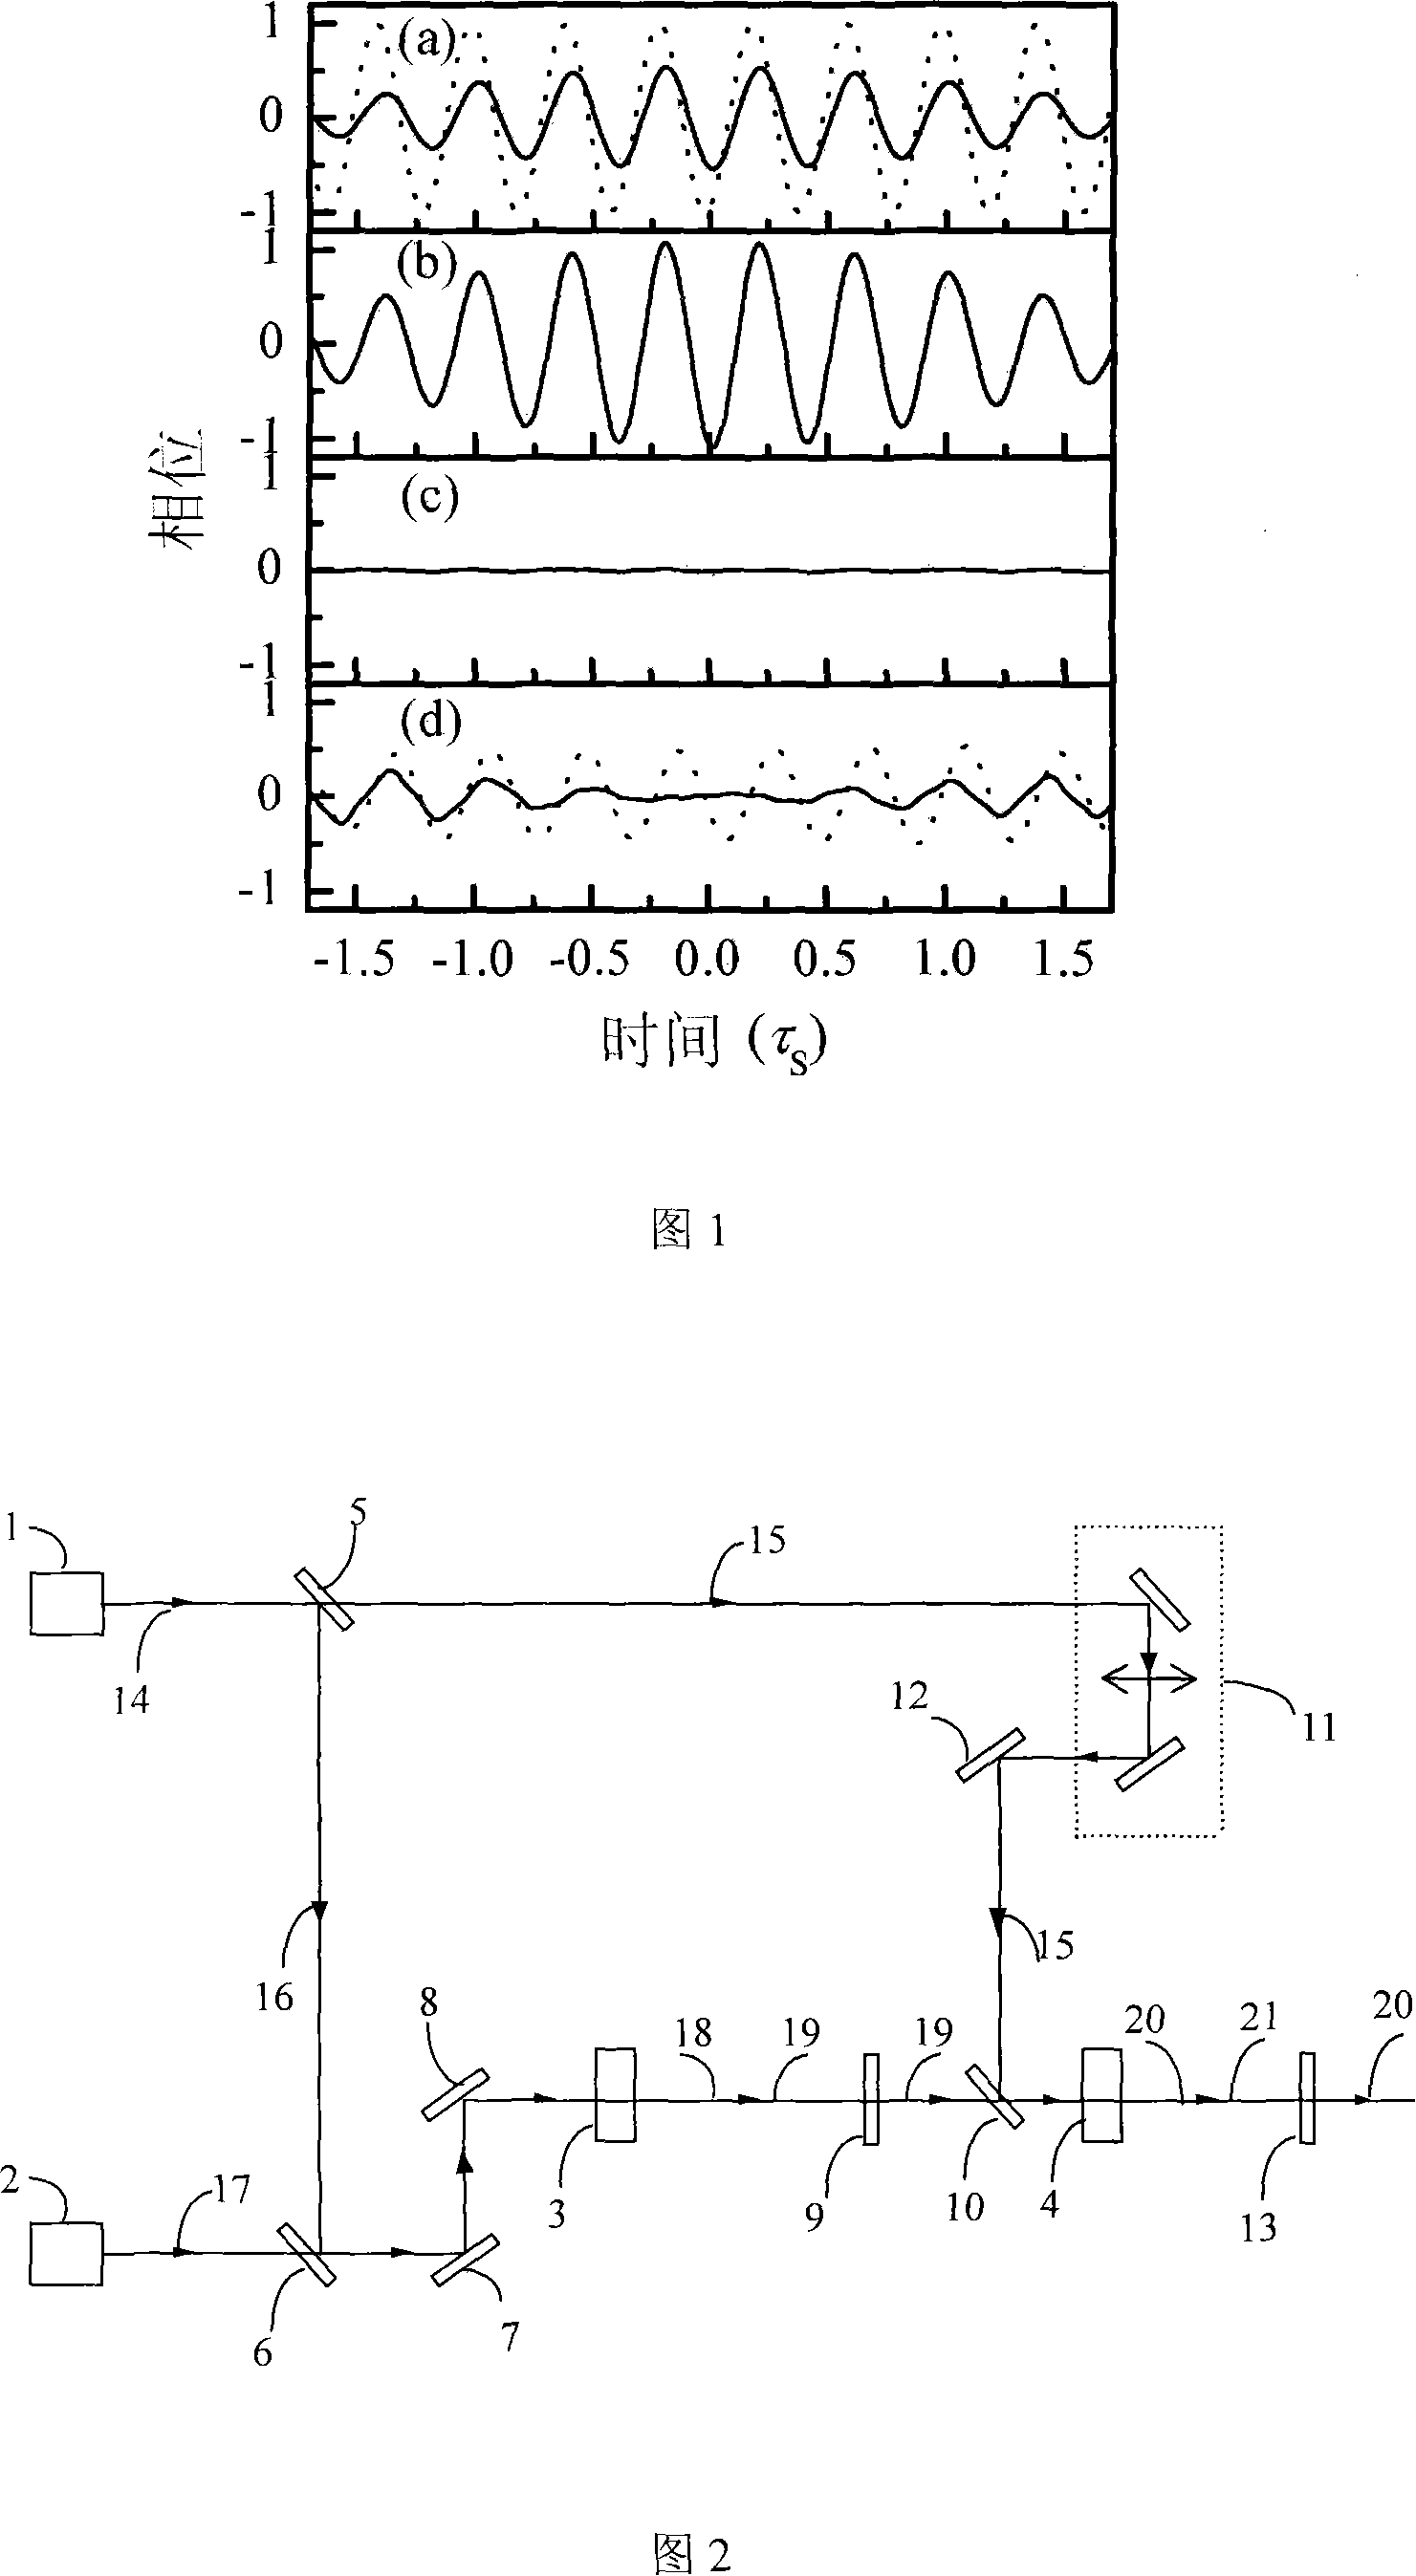 Method for enhancing optical parametric amplifier output magnified signal light impulse and beam quality